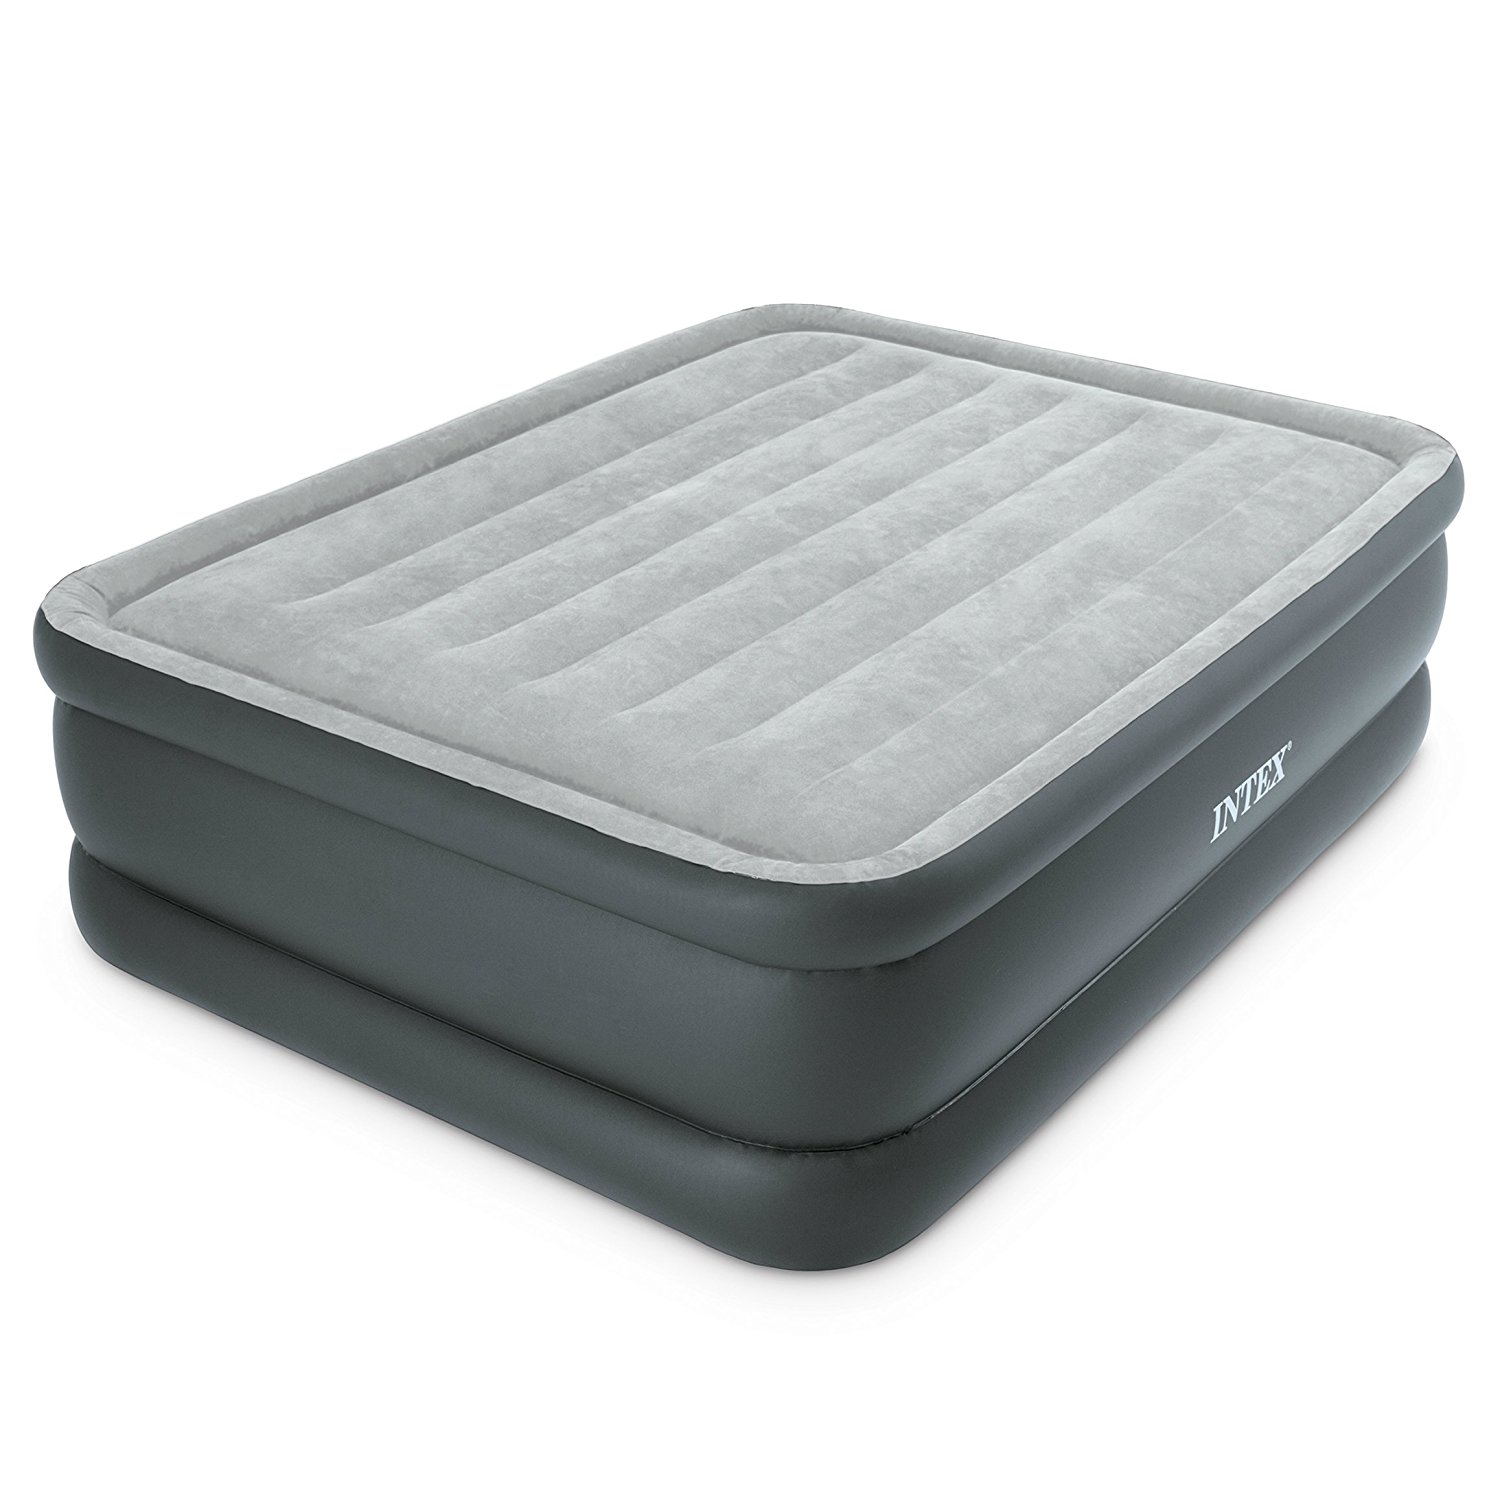 Save on the Intex Dura-Beam Queen Airbed with Built-In Electric Pump – Just $34.99!